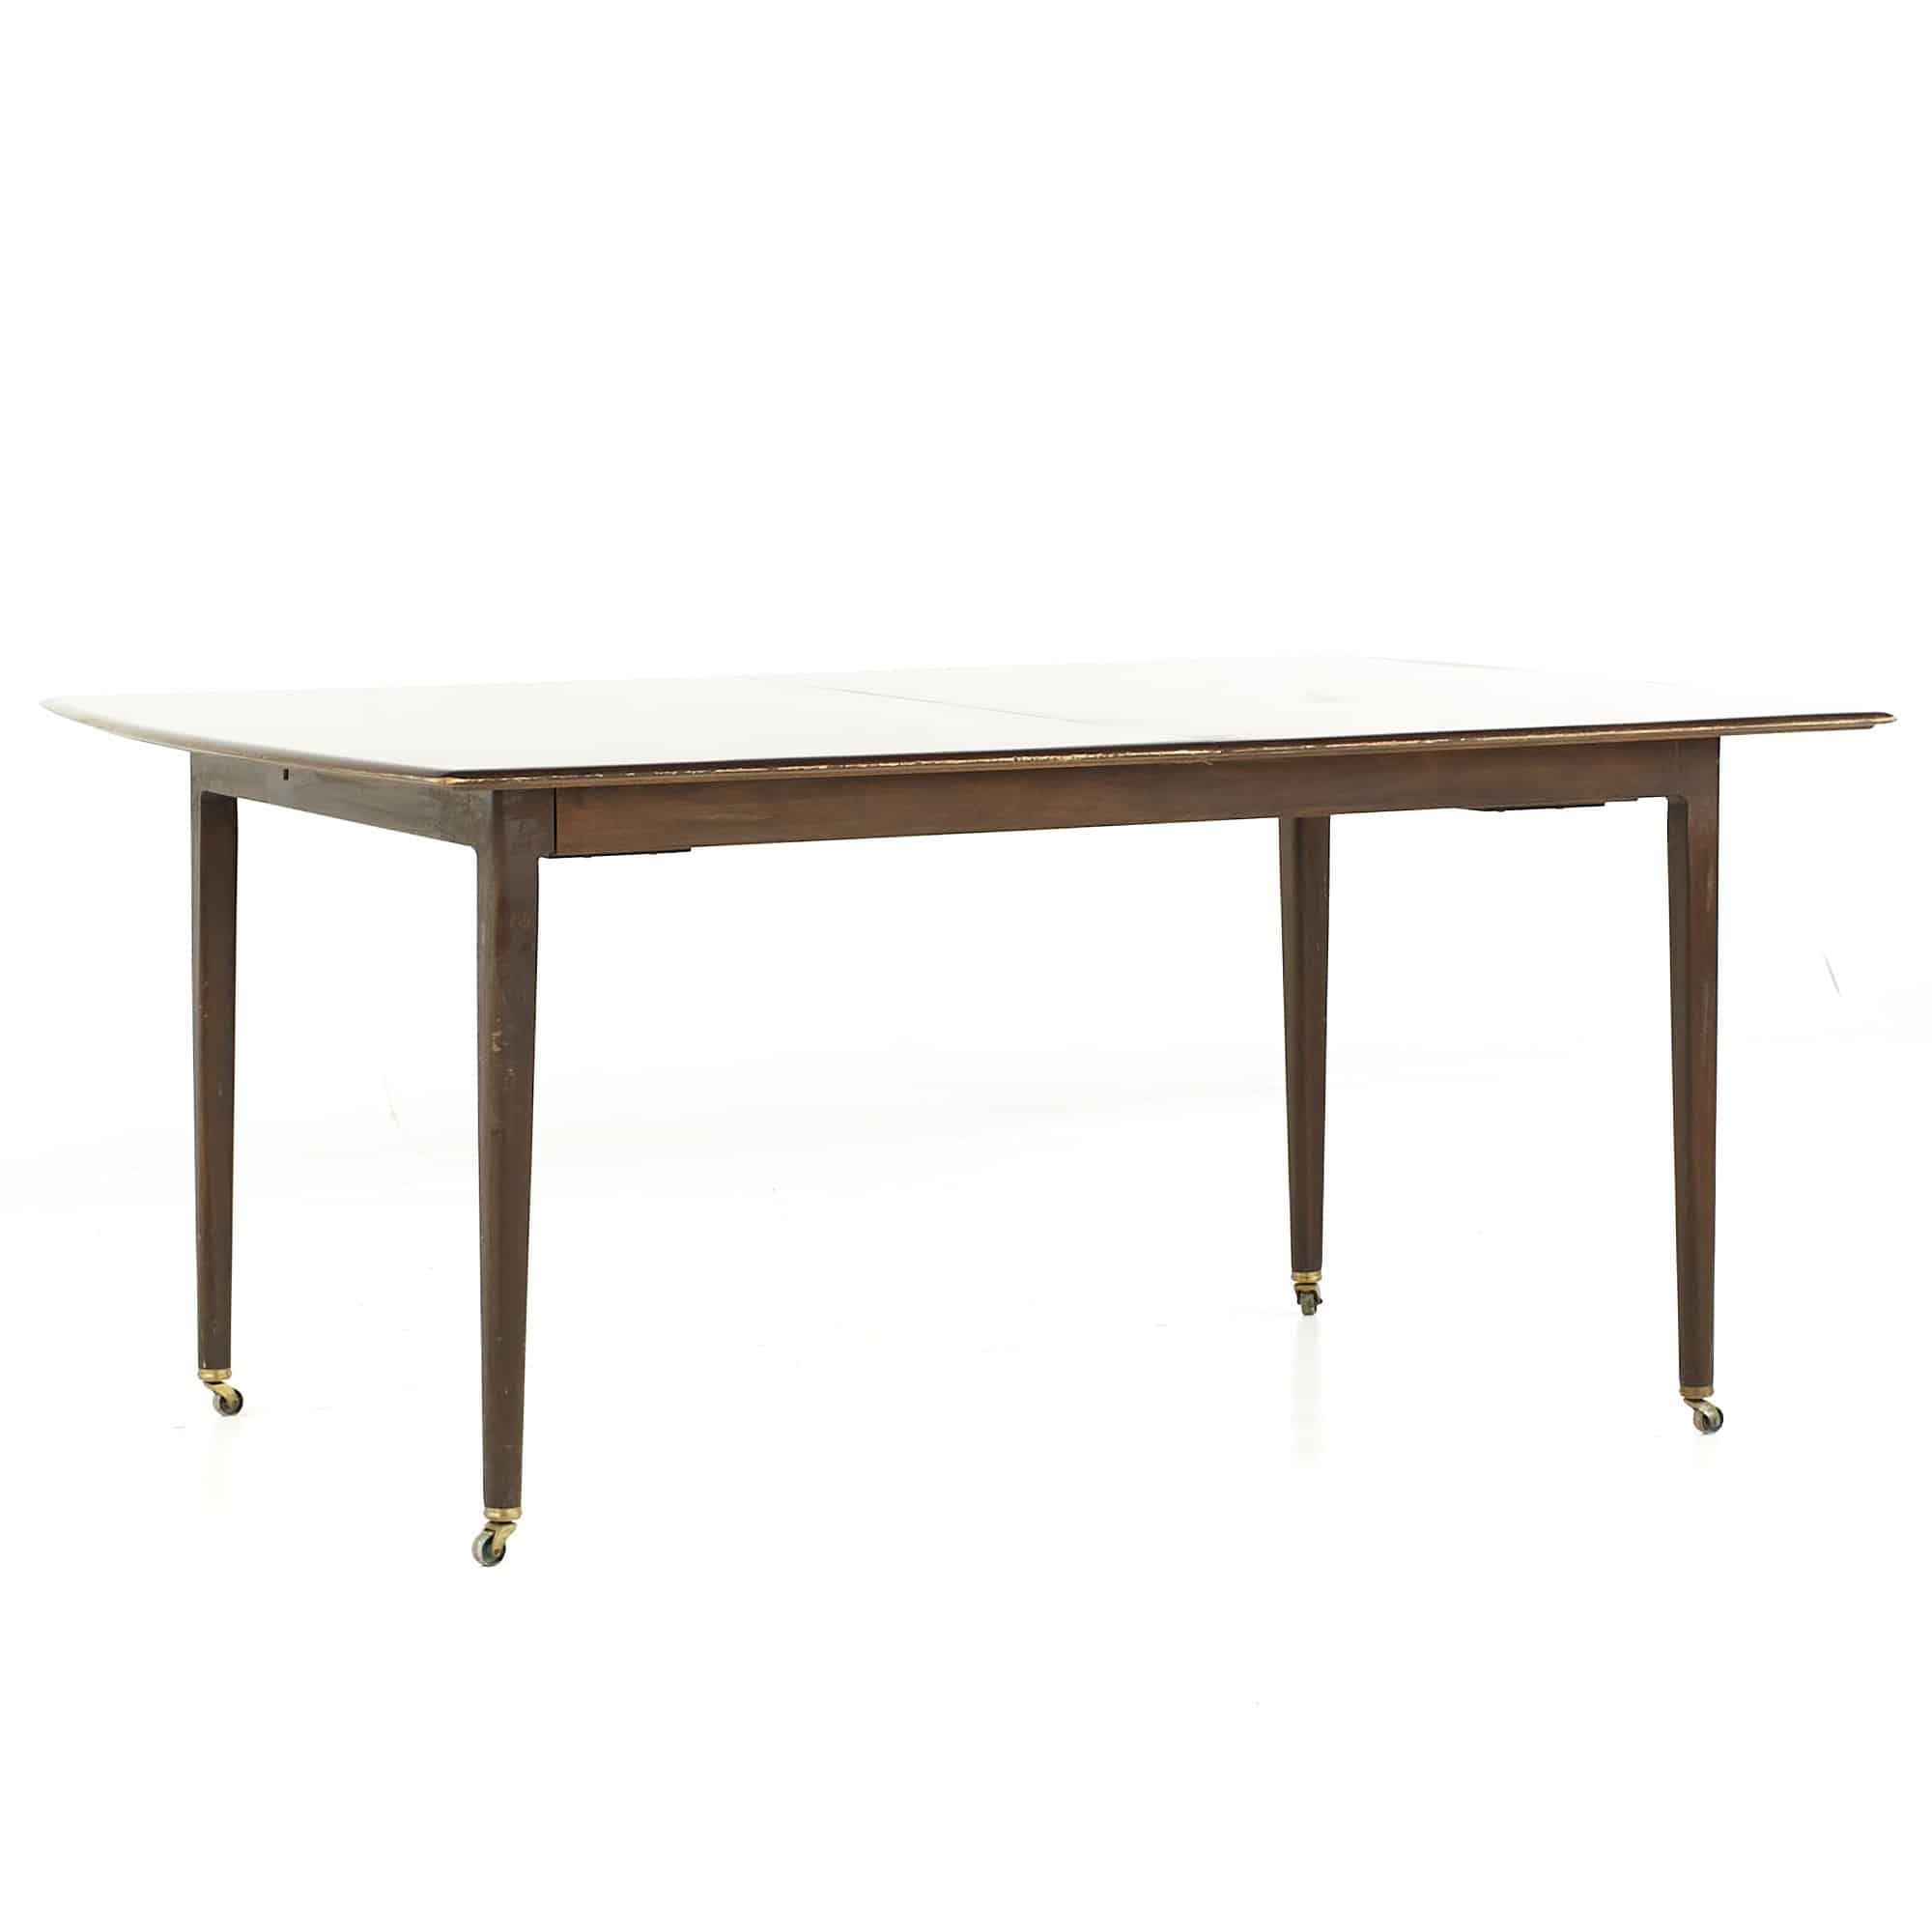 Dunbar Mid Century Expanding Hidden Leaf Walnut Dining Table with 2 Leaves